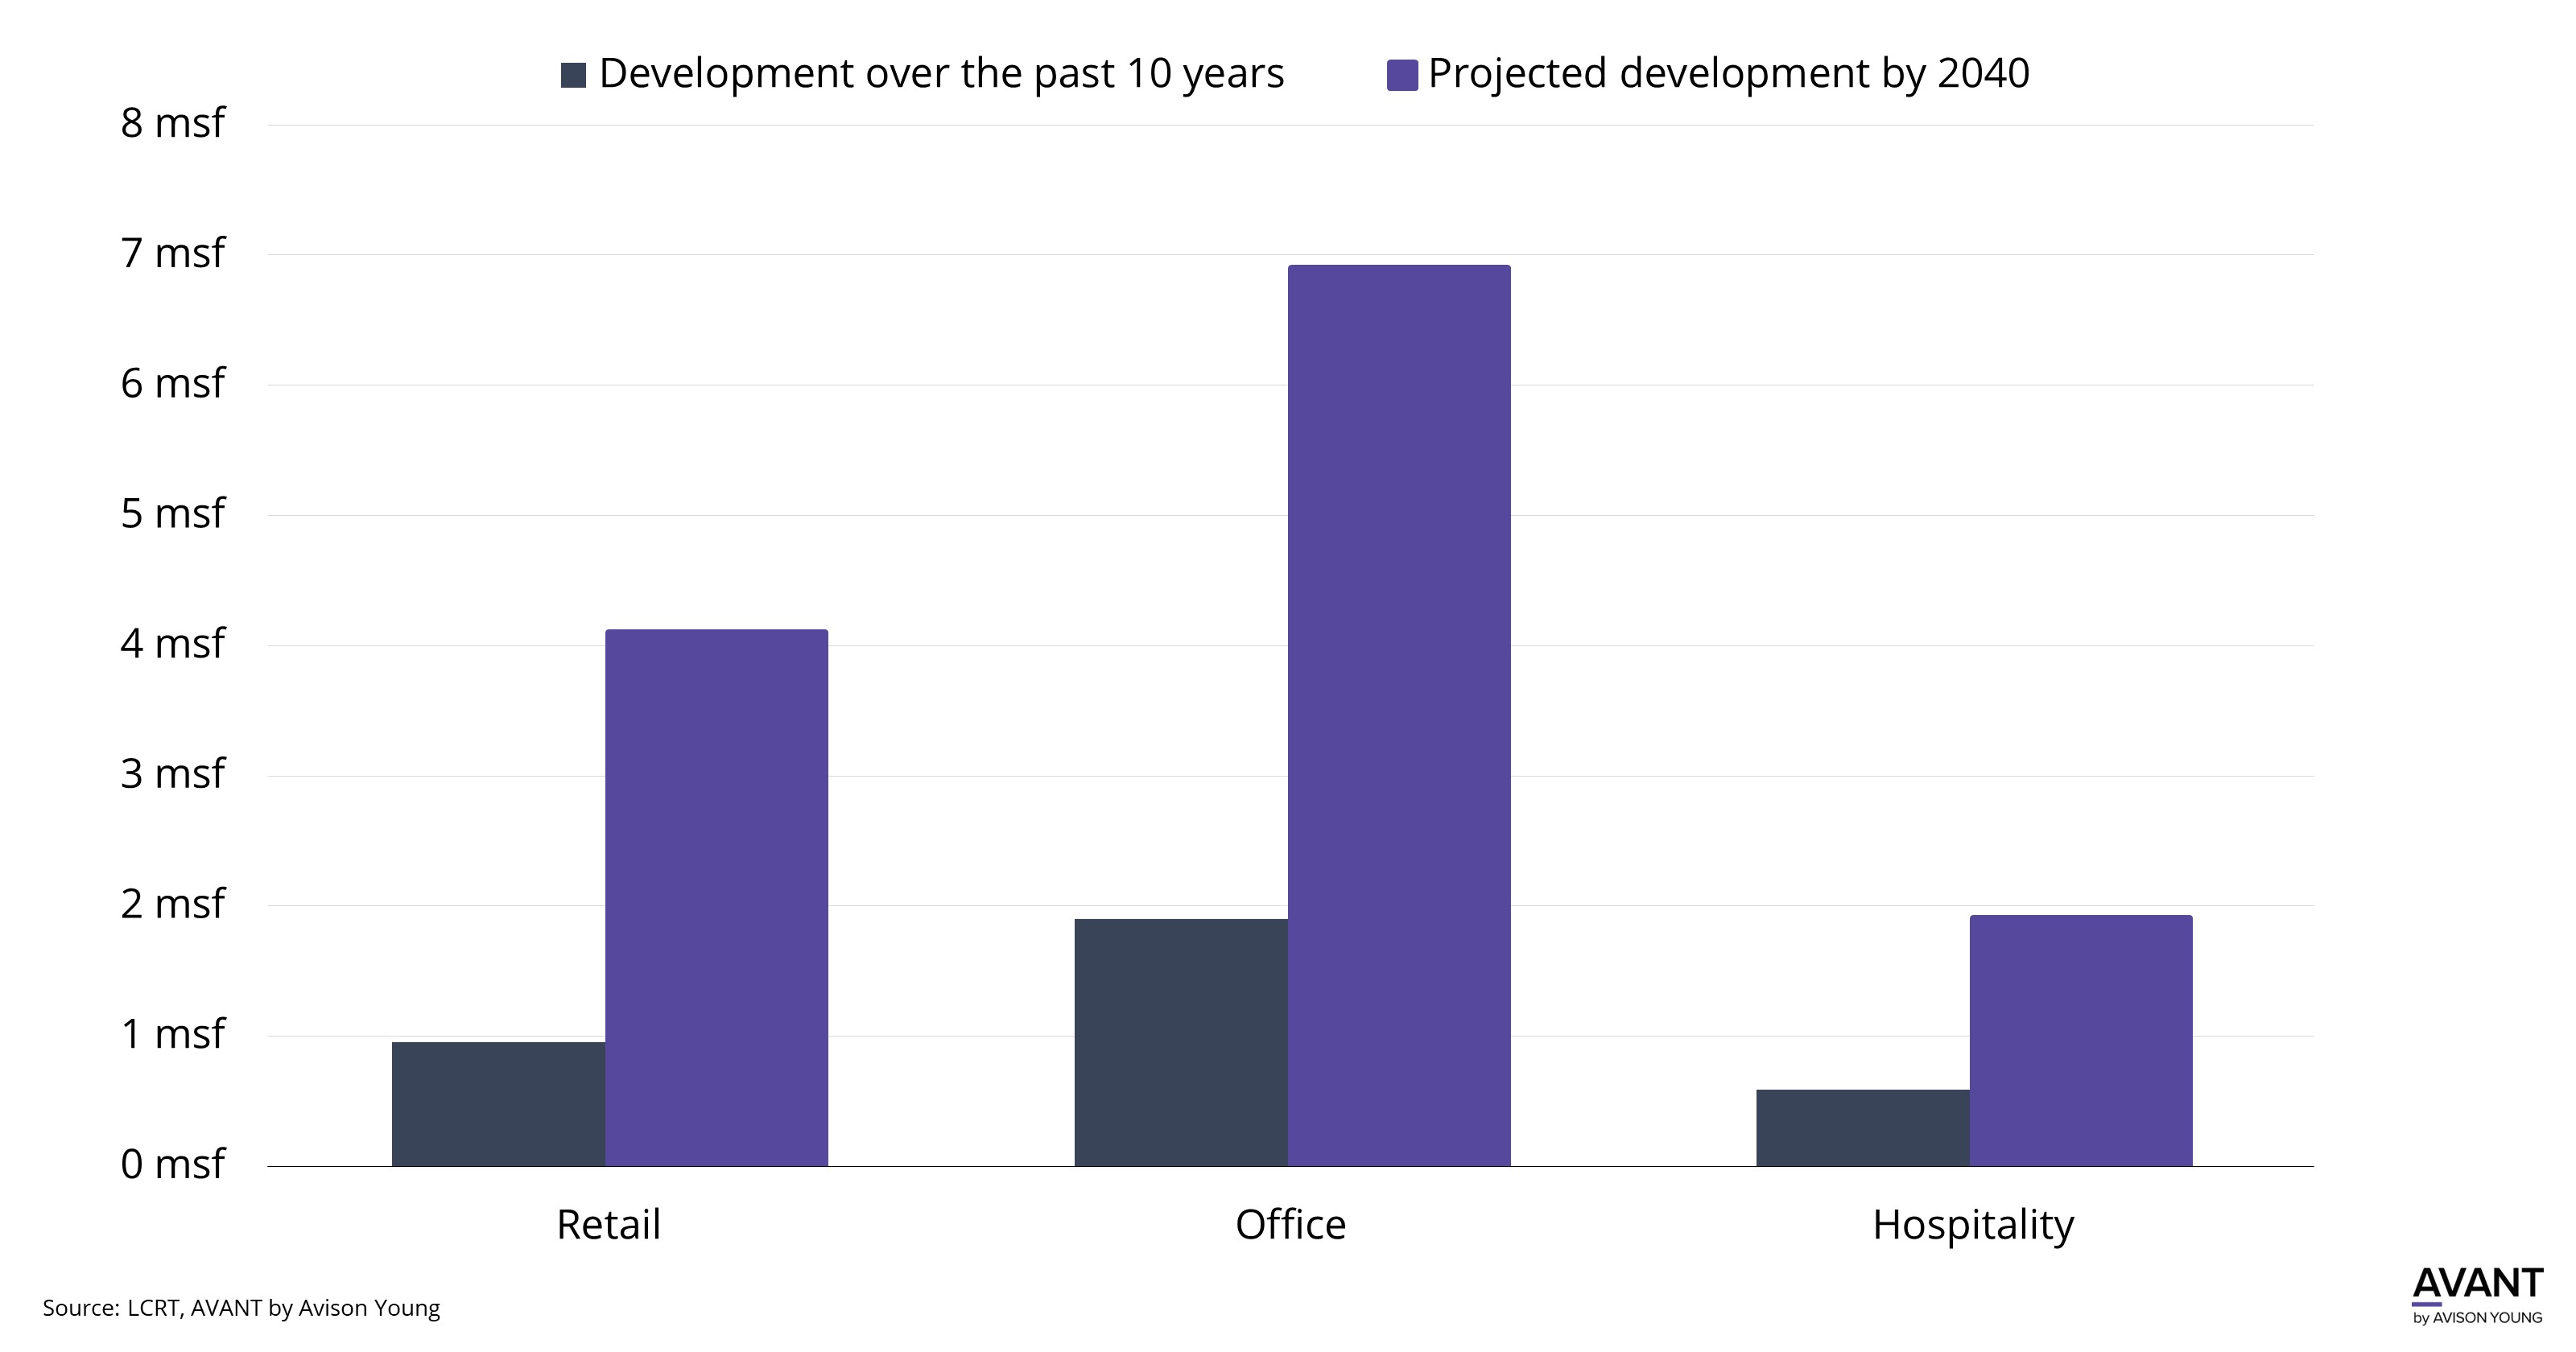 Projected development in retail, office, and hospitality in Charleston by 2040 compared to development over the past 10 years